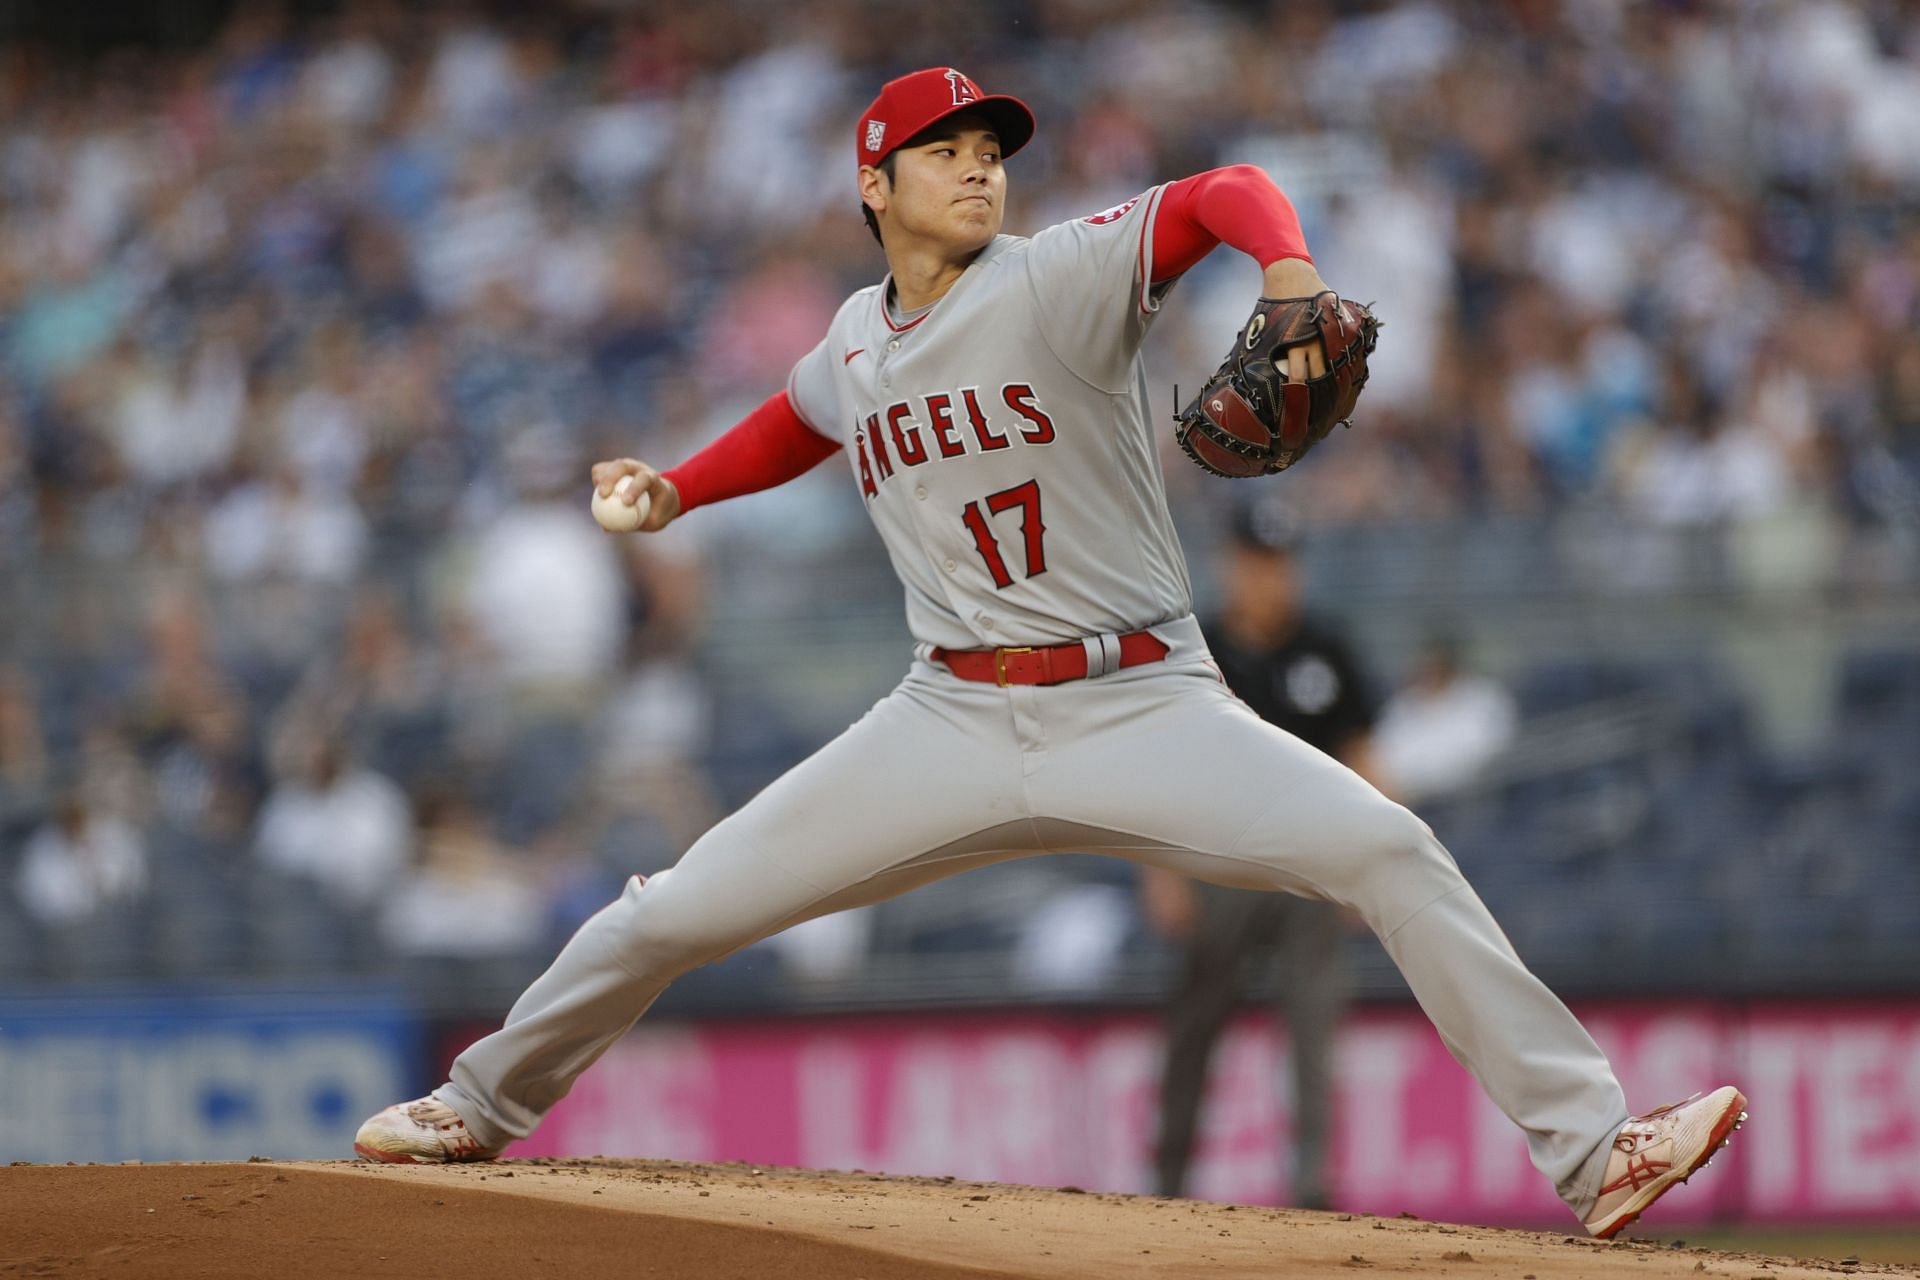 Shohei Ohtani pitching against the New York Yankees